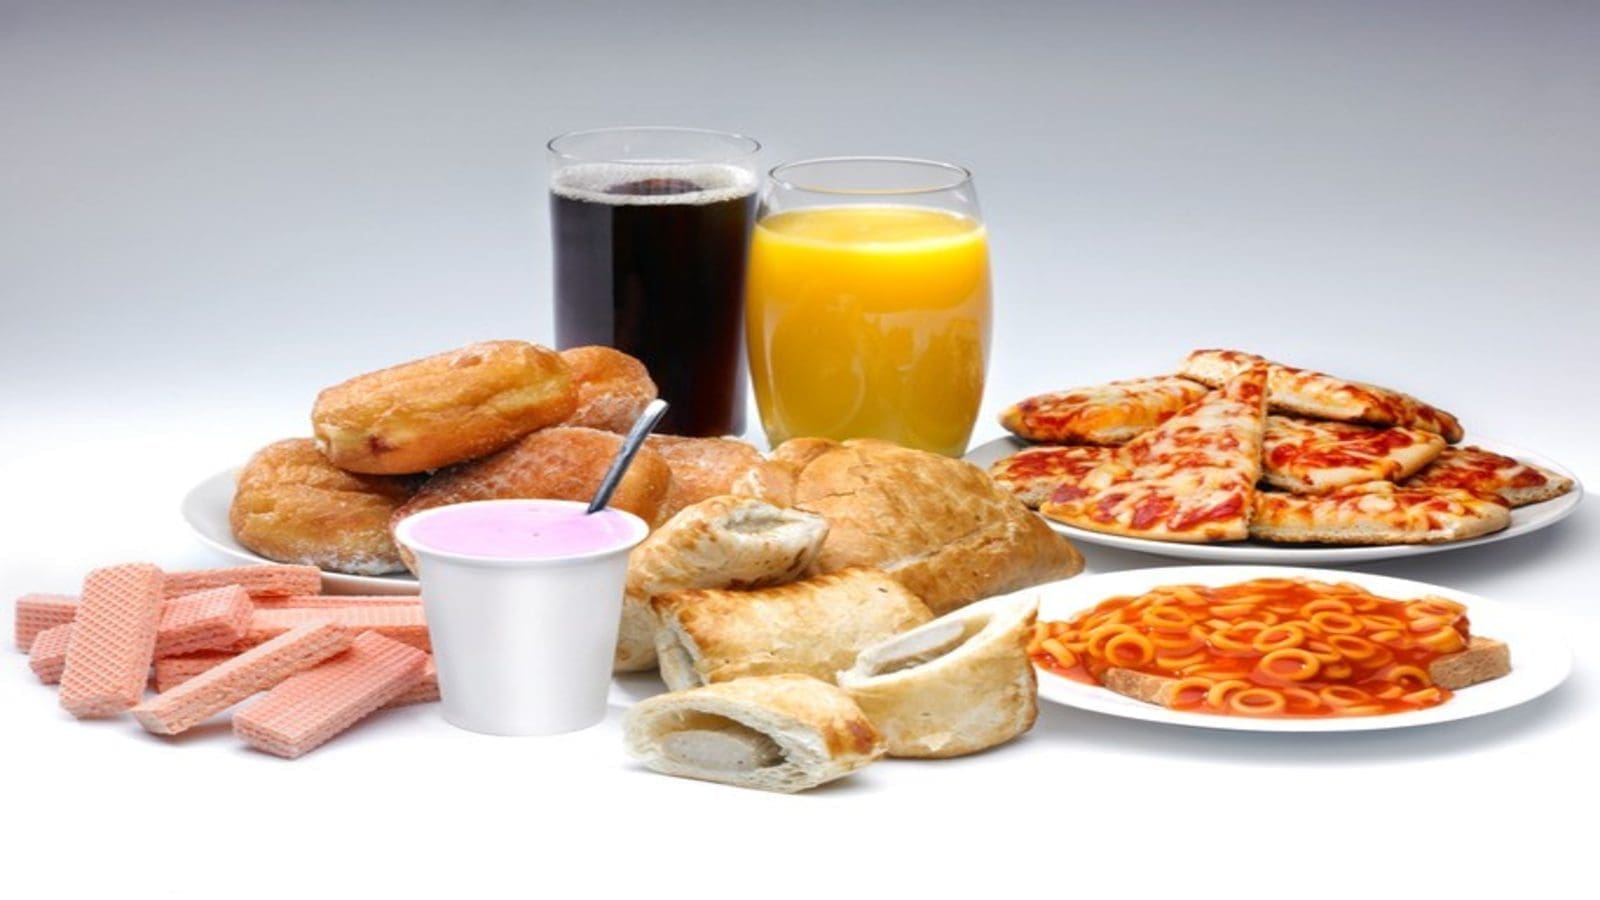 Eating ultra-processed foods significantly increases obesity risk among adolescents 